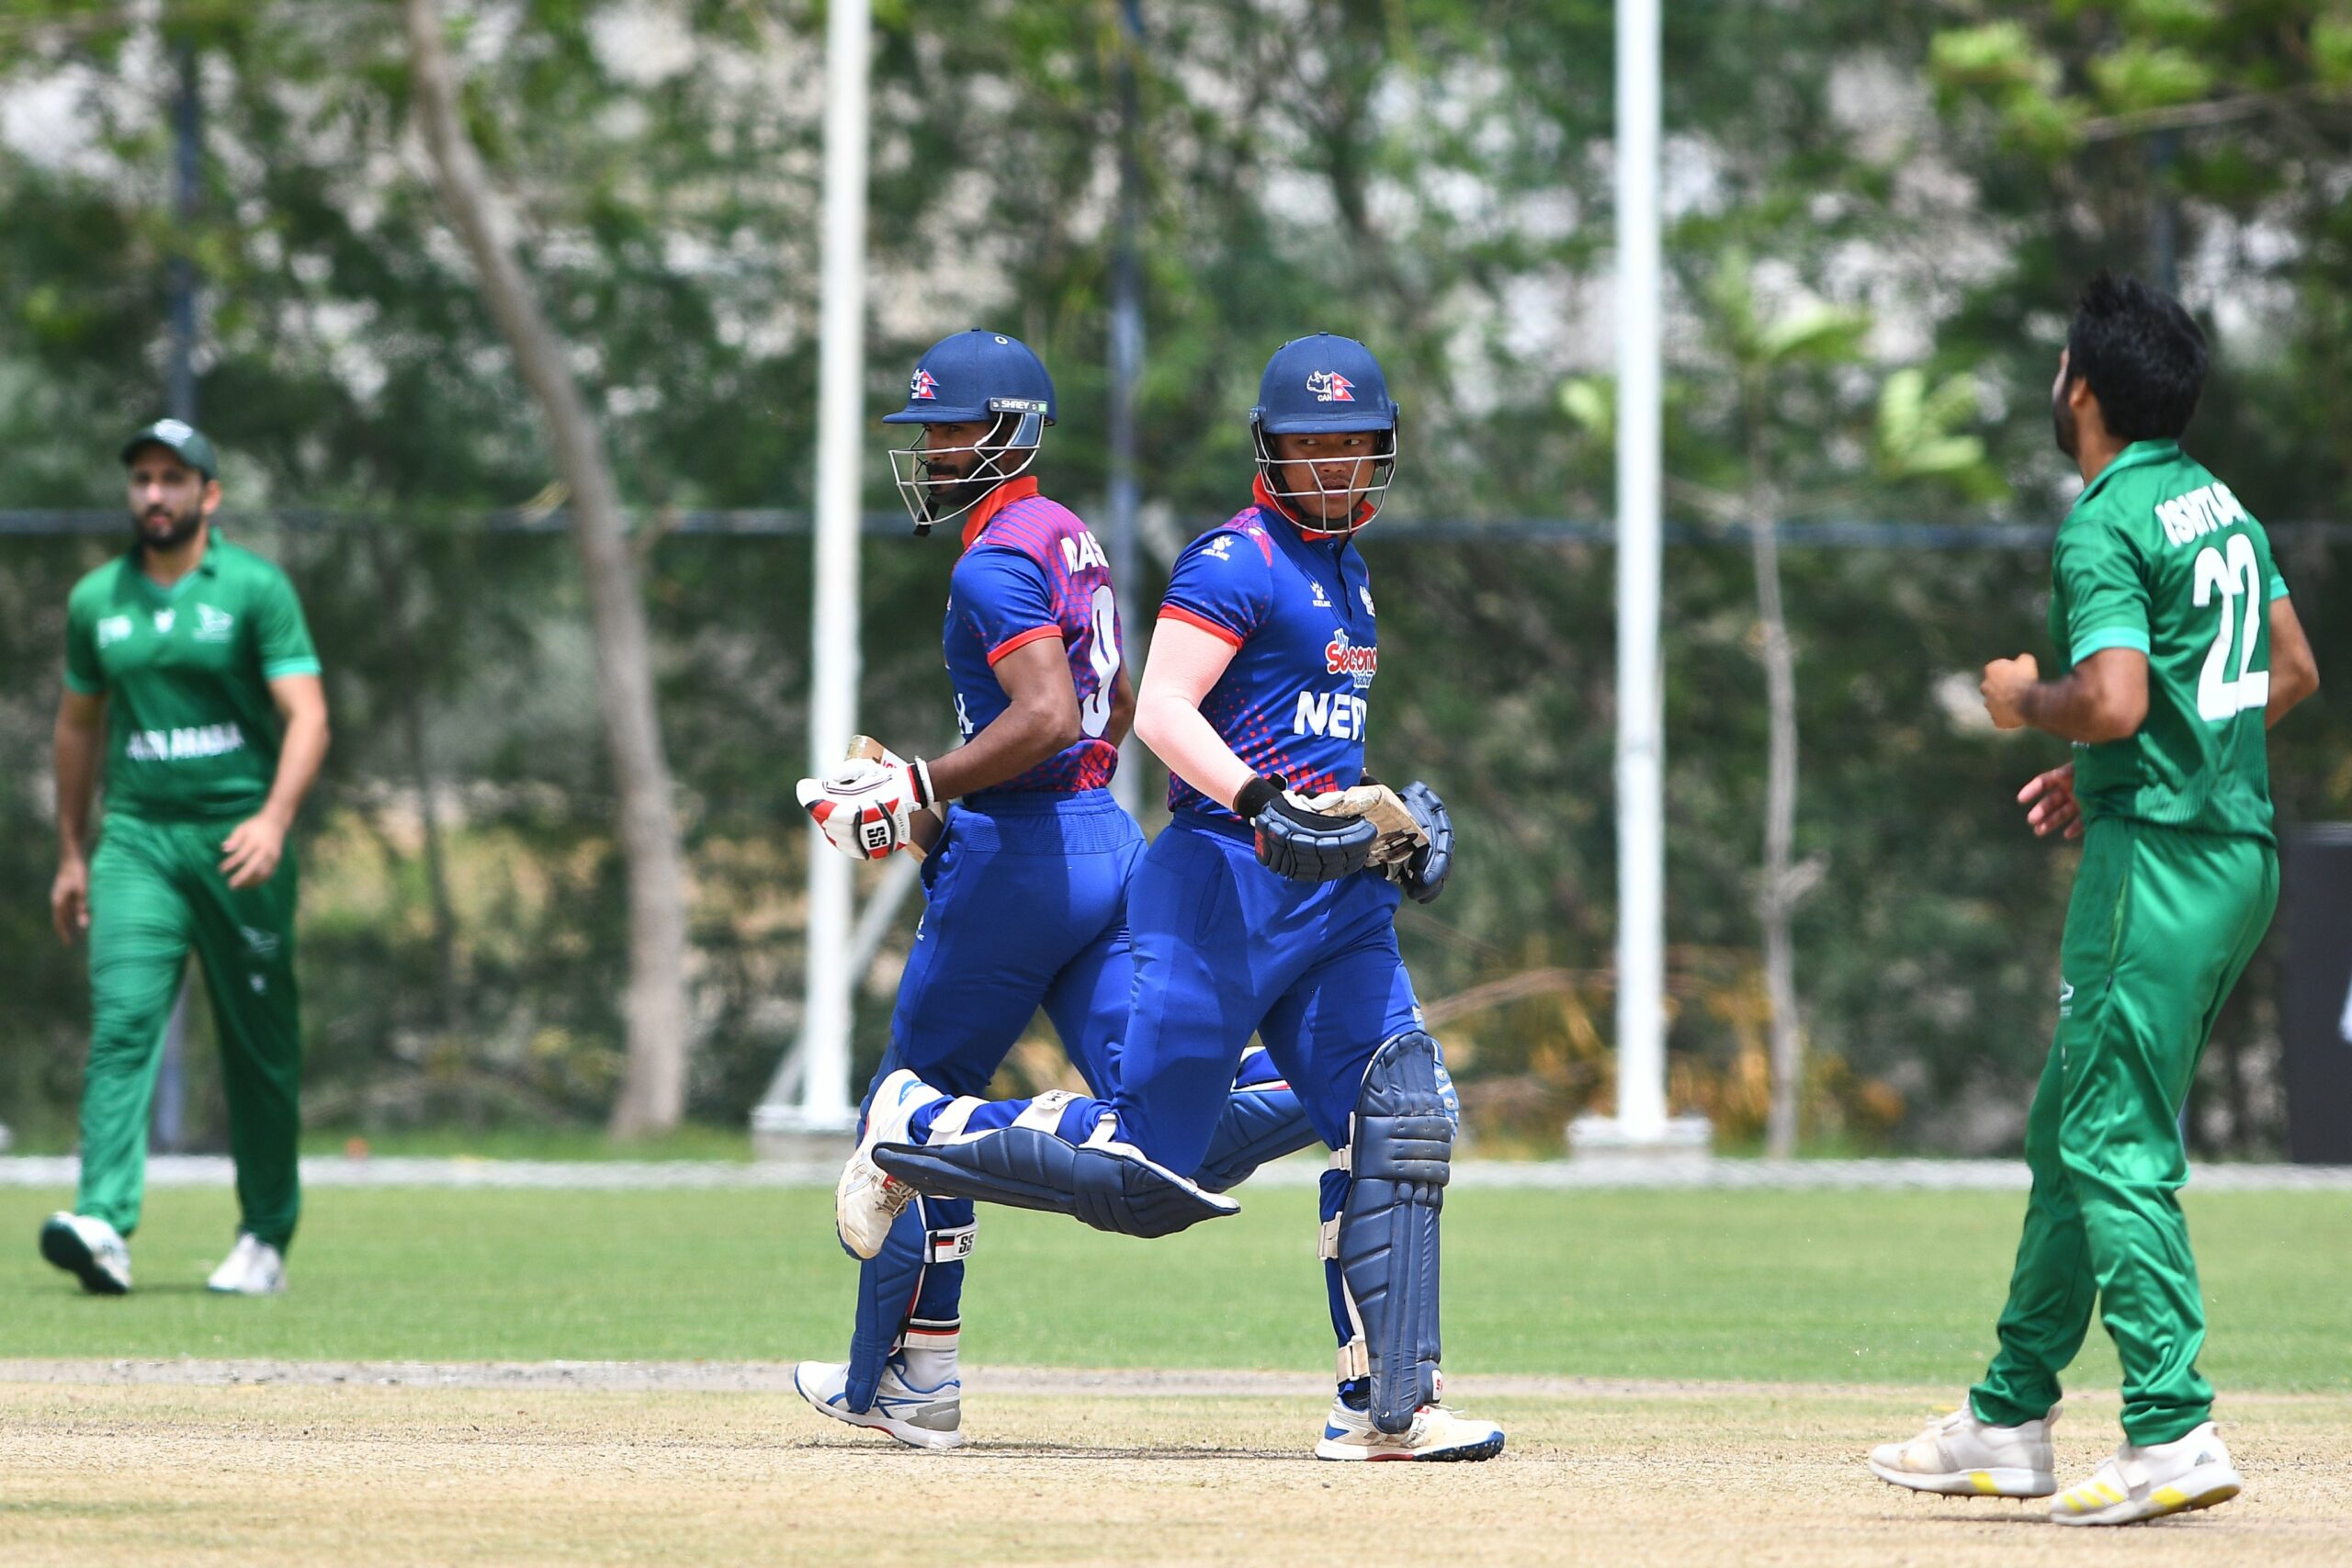 Nepal secures convincing victory over Saudi Arabia by six wickets